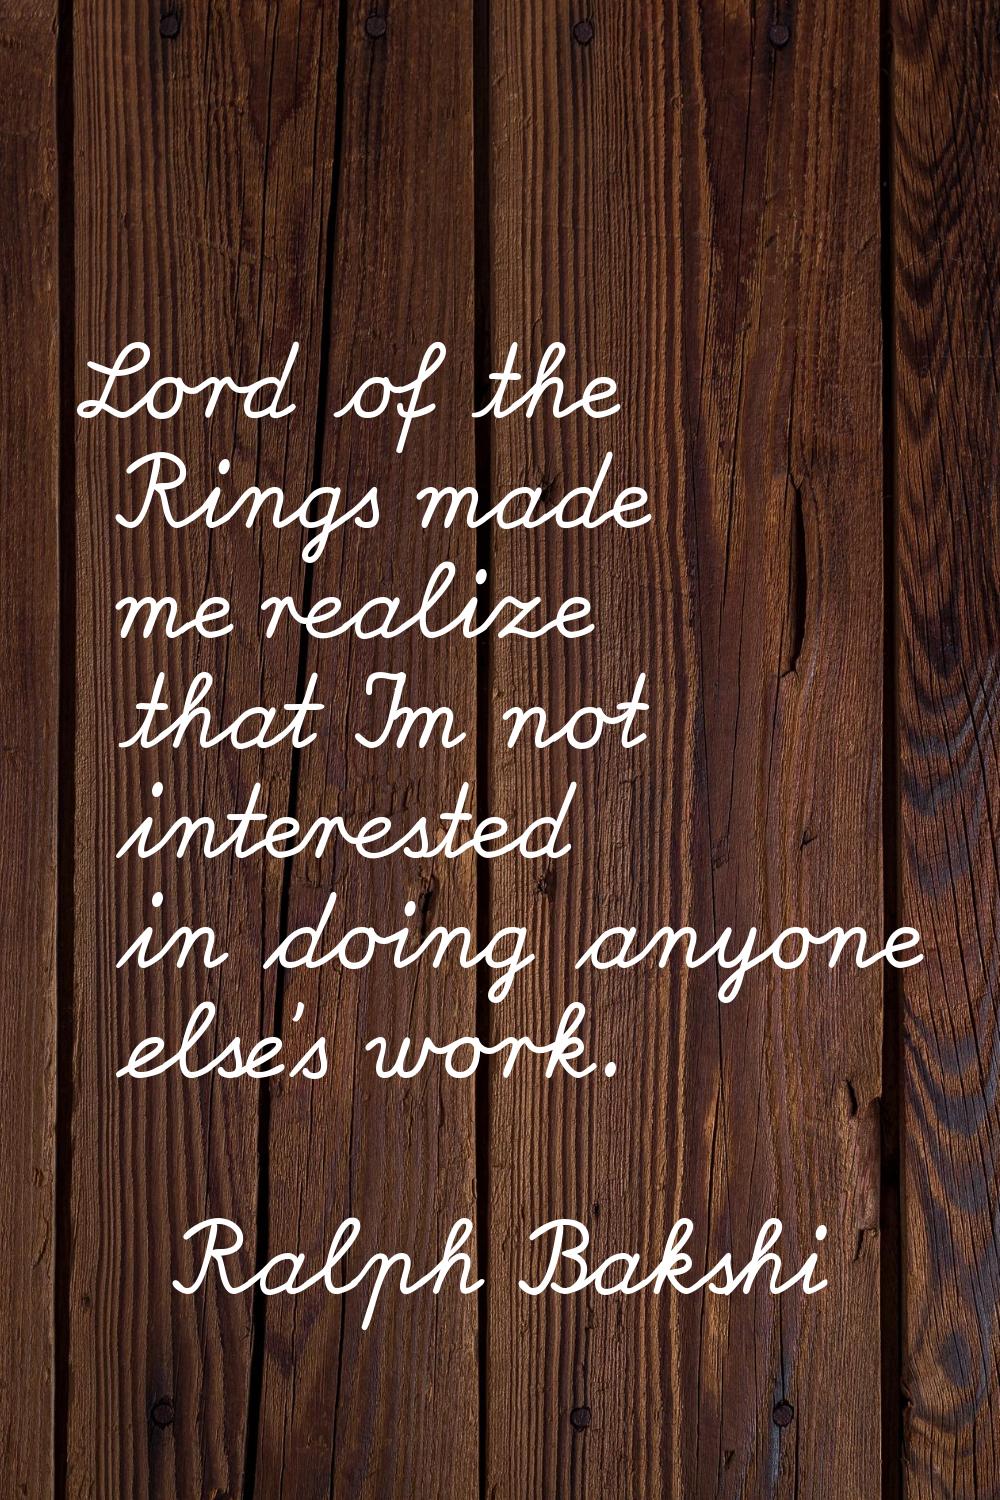 Lord of the Rings made me realize that I'm not interested in doing anyone else's work.